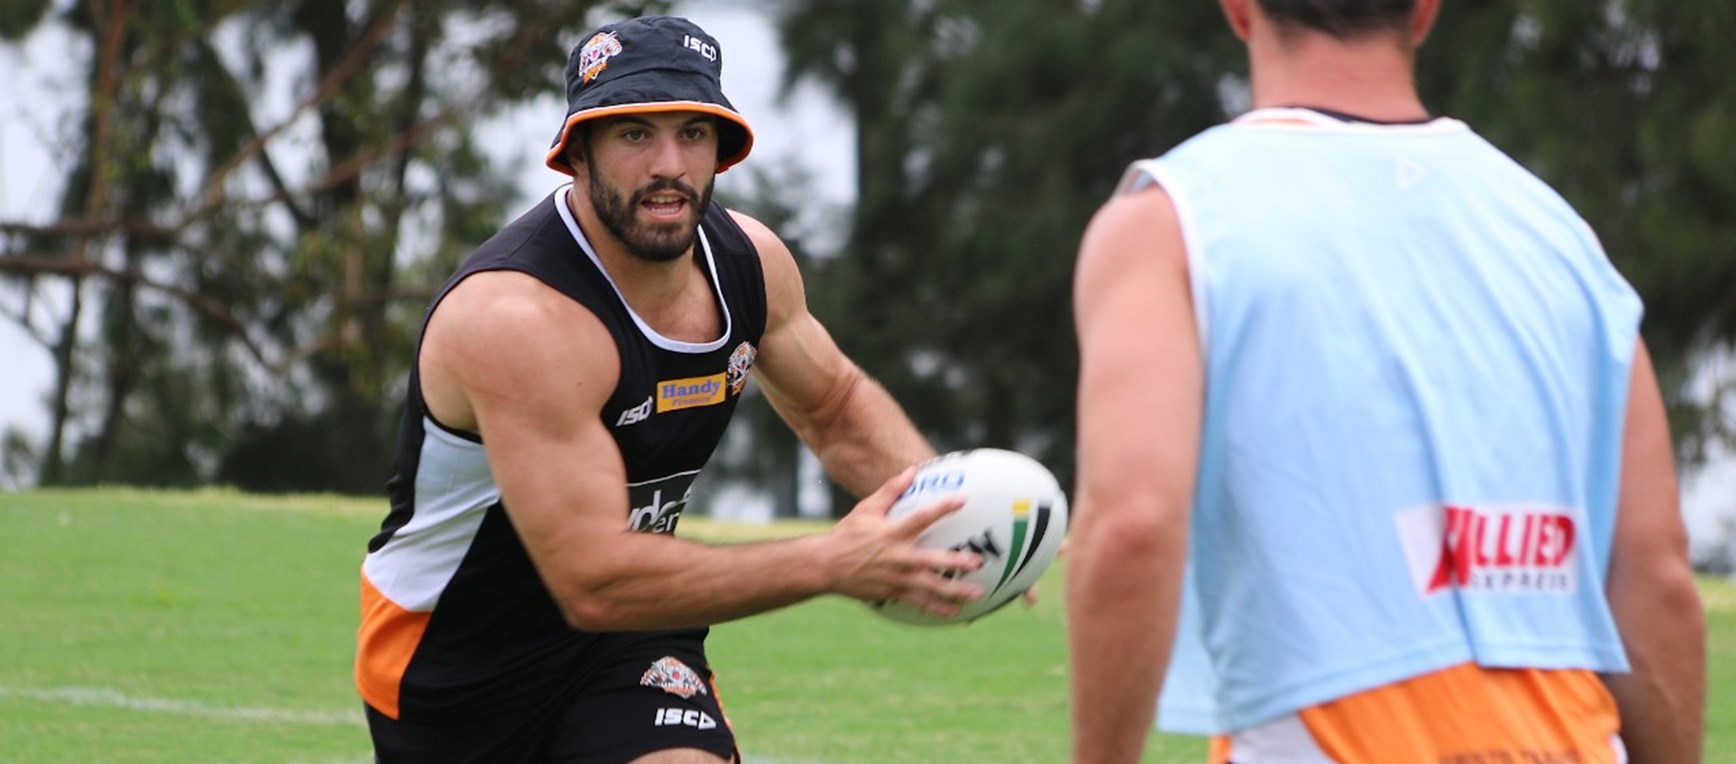 Gallery: Field session at Leichhardt Oval